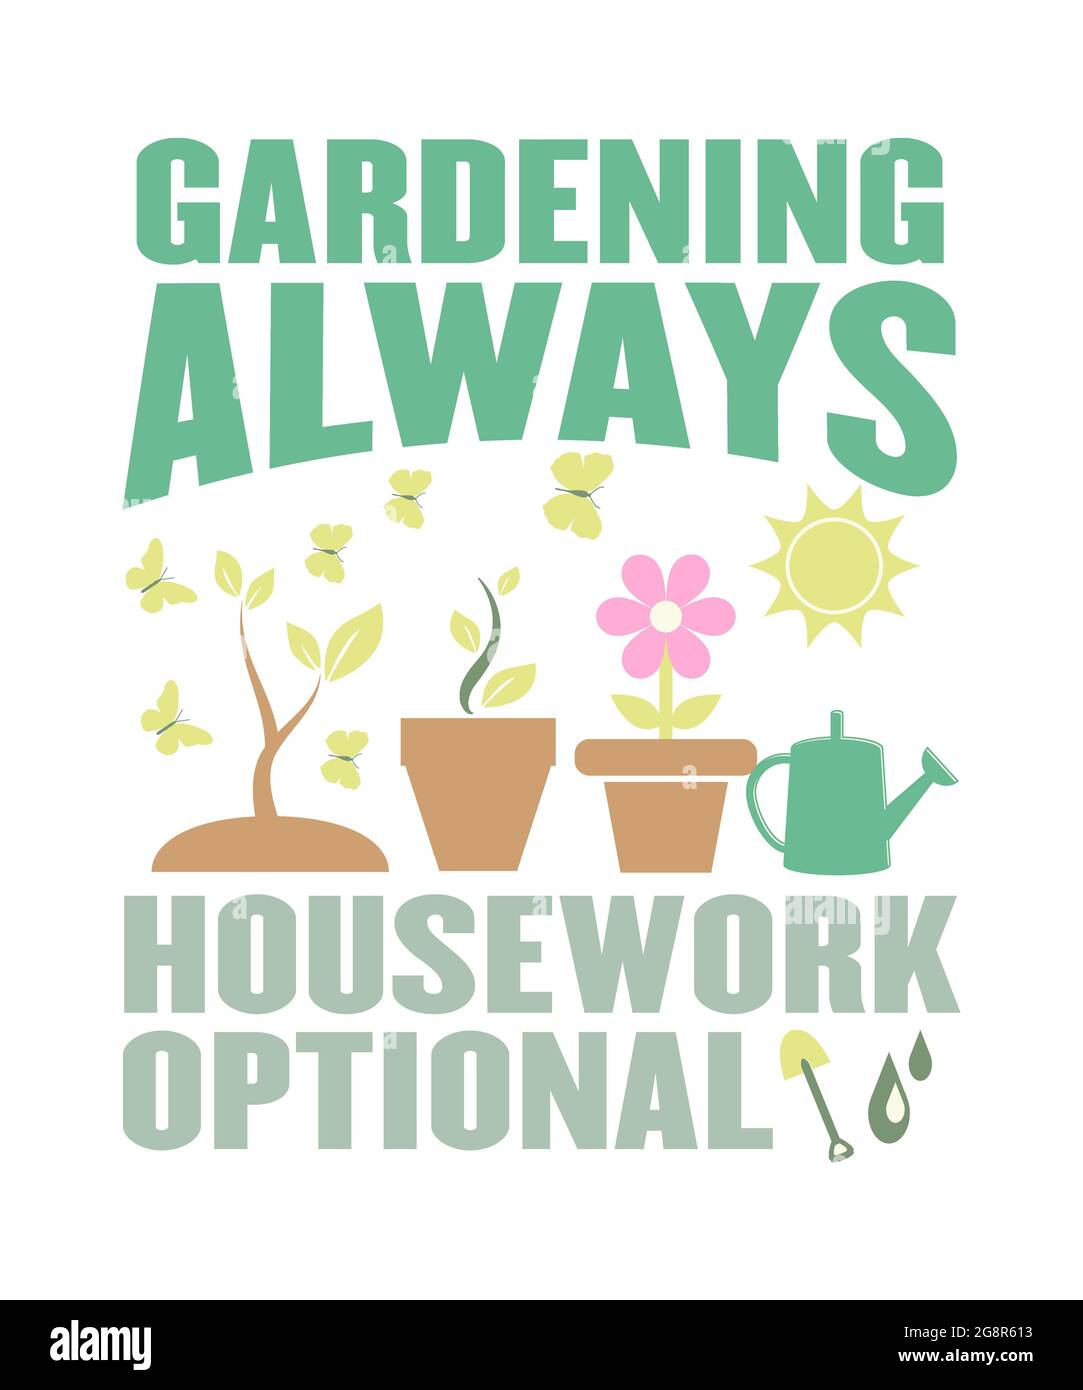 Gardening always housework optional quote for gardeners and people who love working in the garden. Potted plants, watering can, sunshine and shovel. Stock Photo